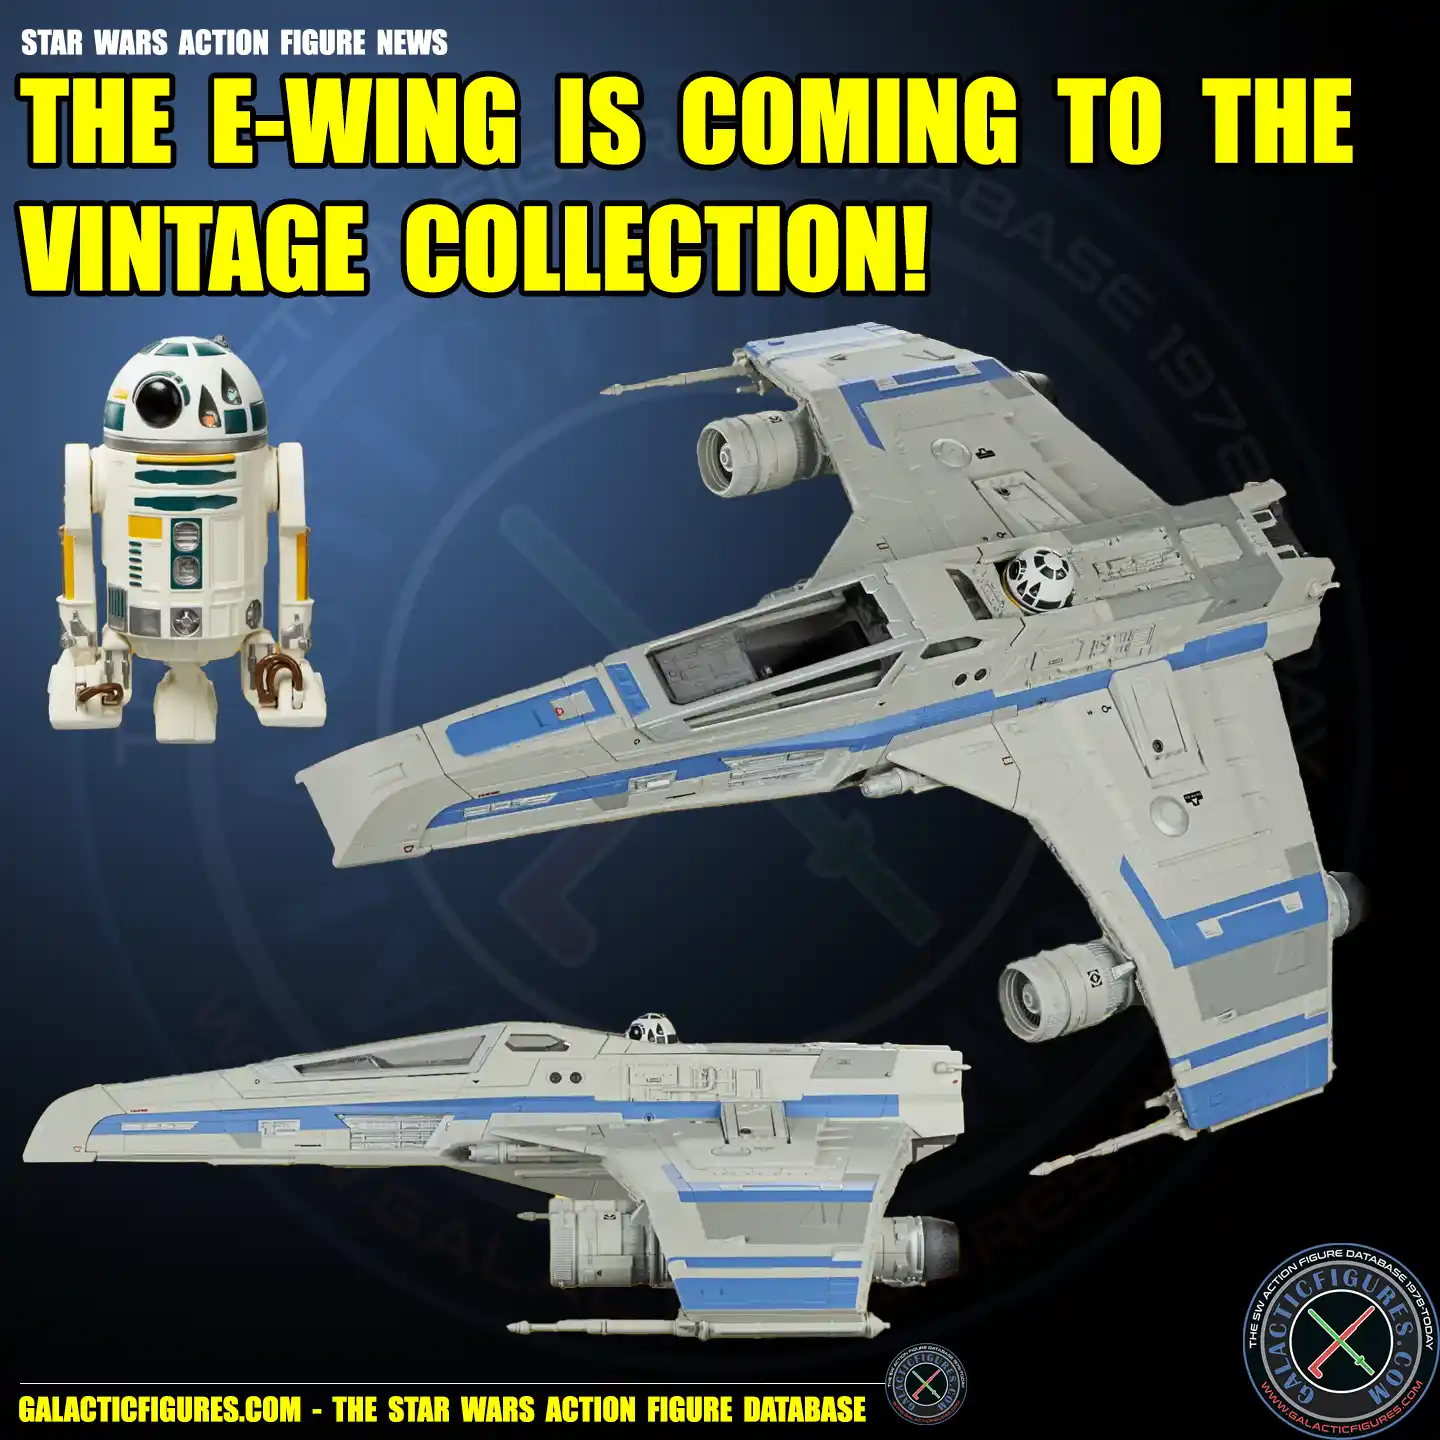 The E-Wing Is Coming To The Vintage Collection